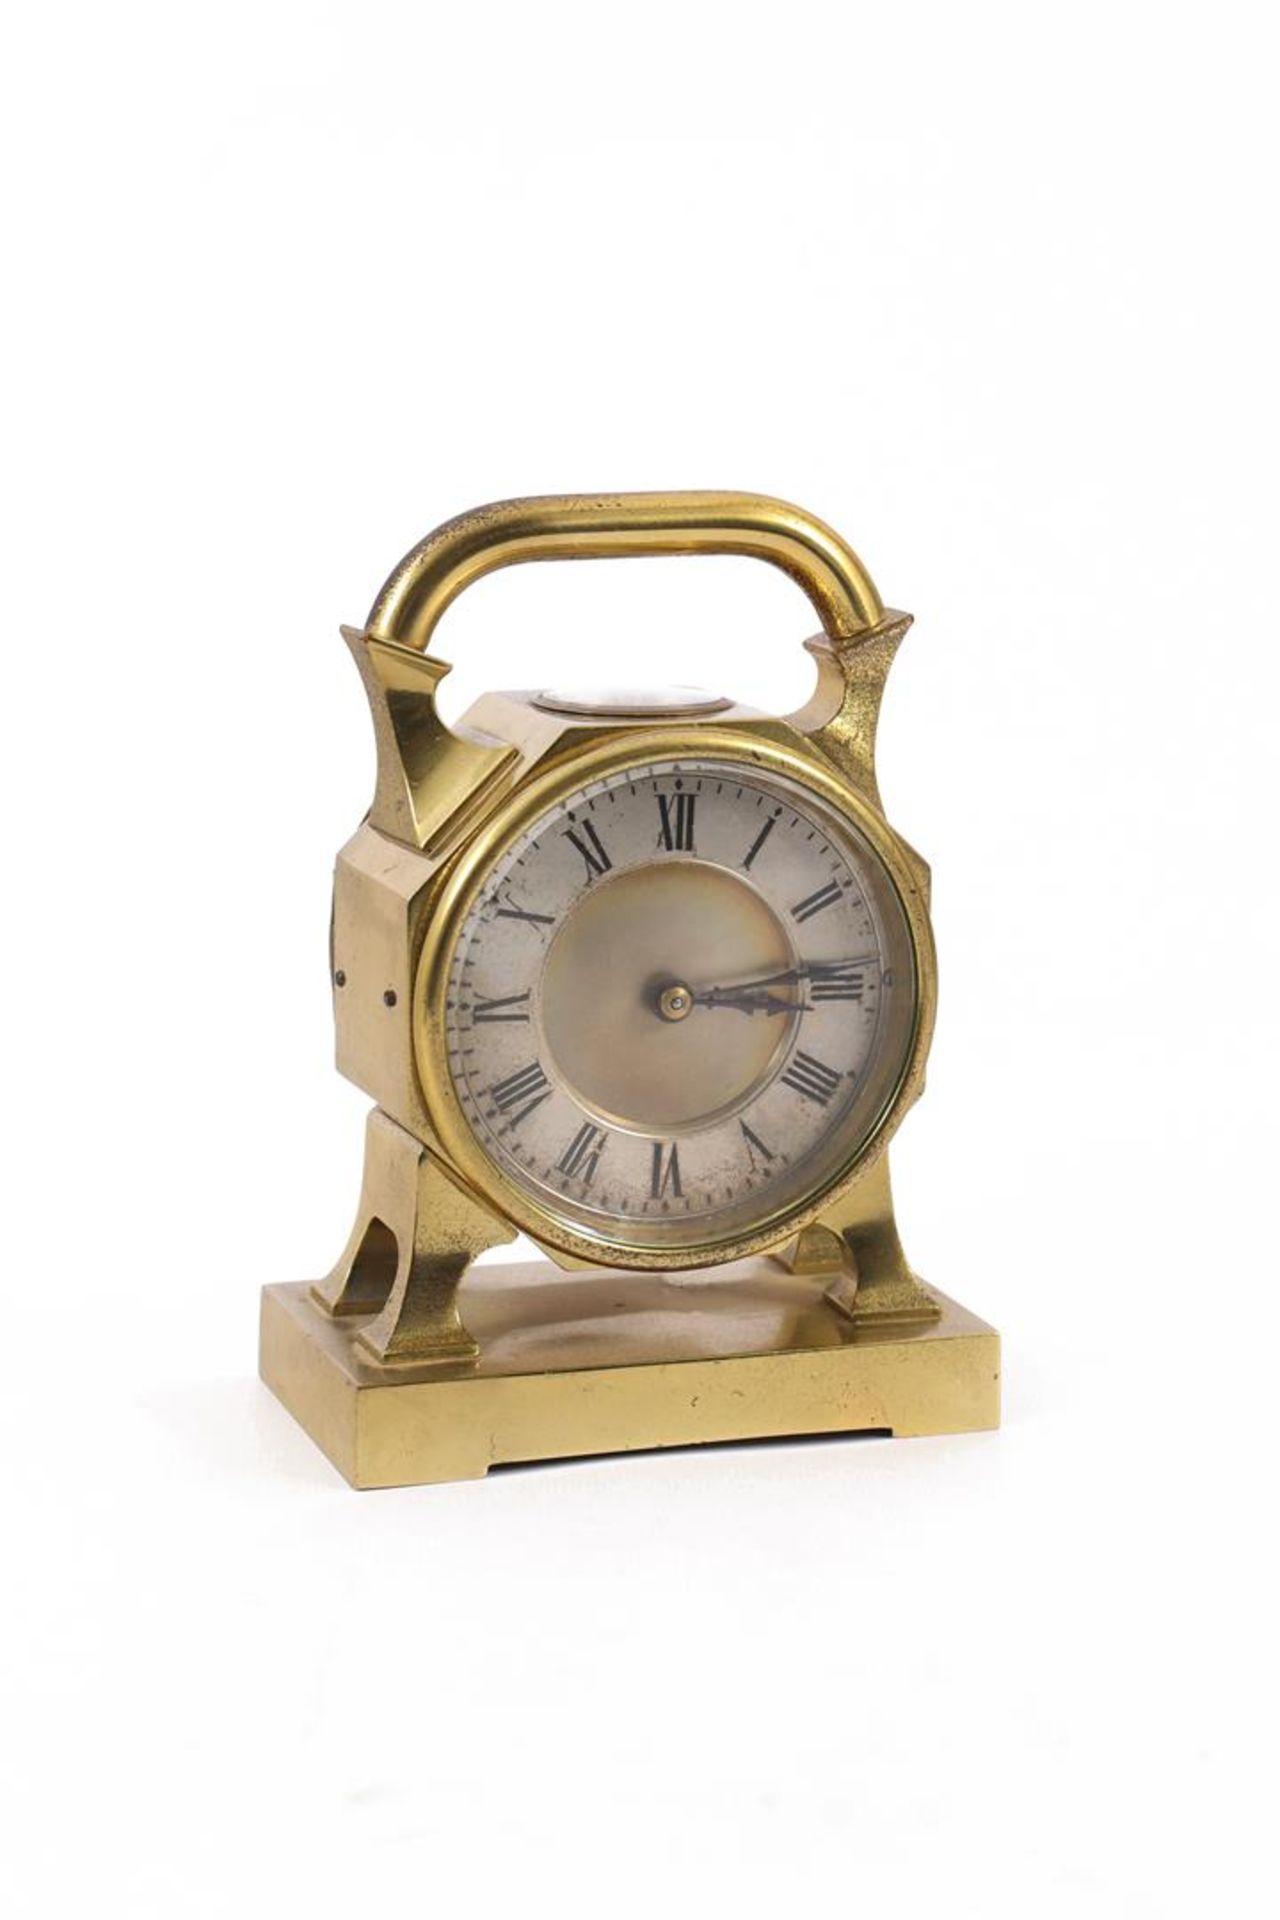 Heavy 1960s table clock in brass case with compass